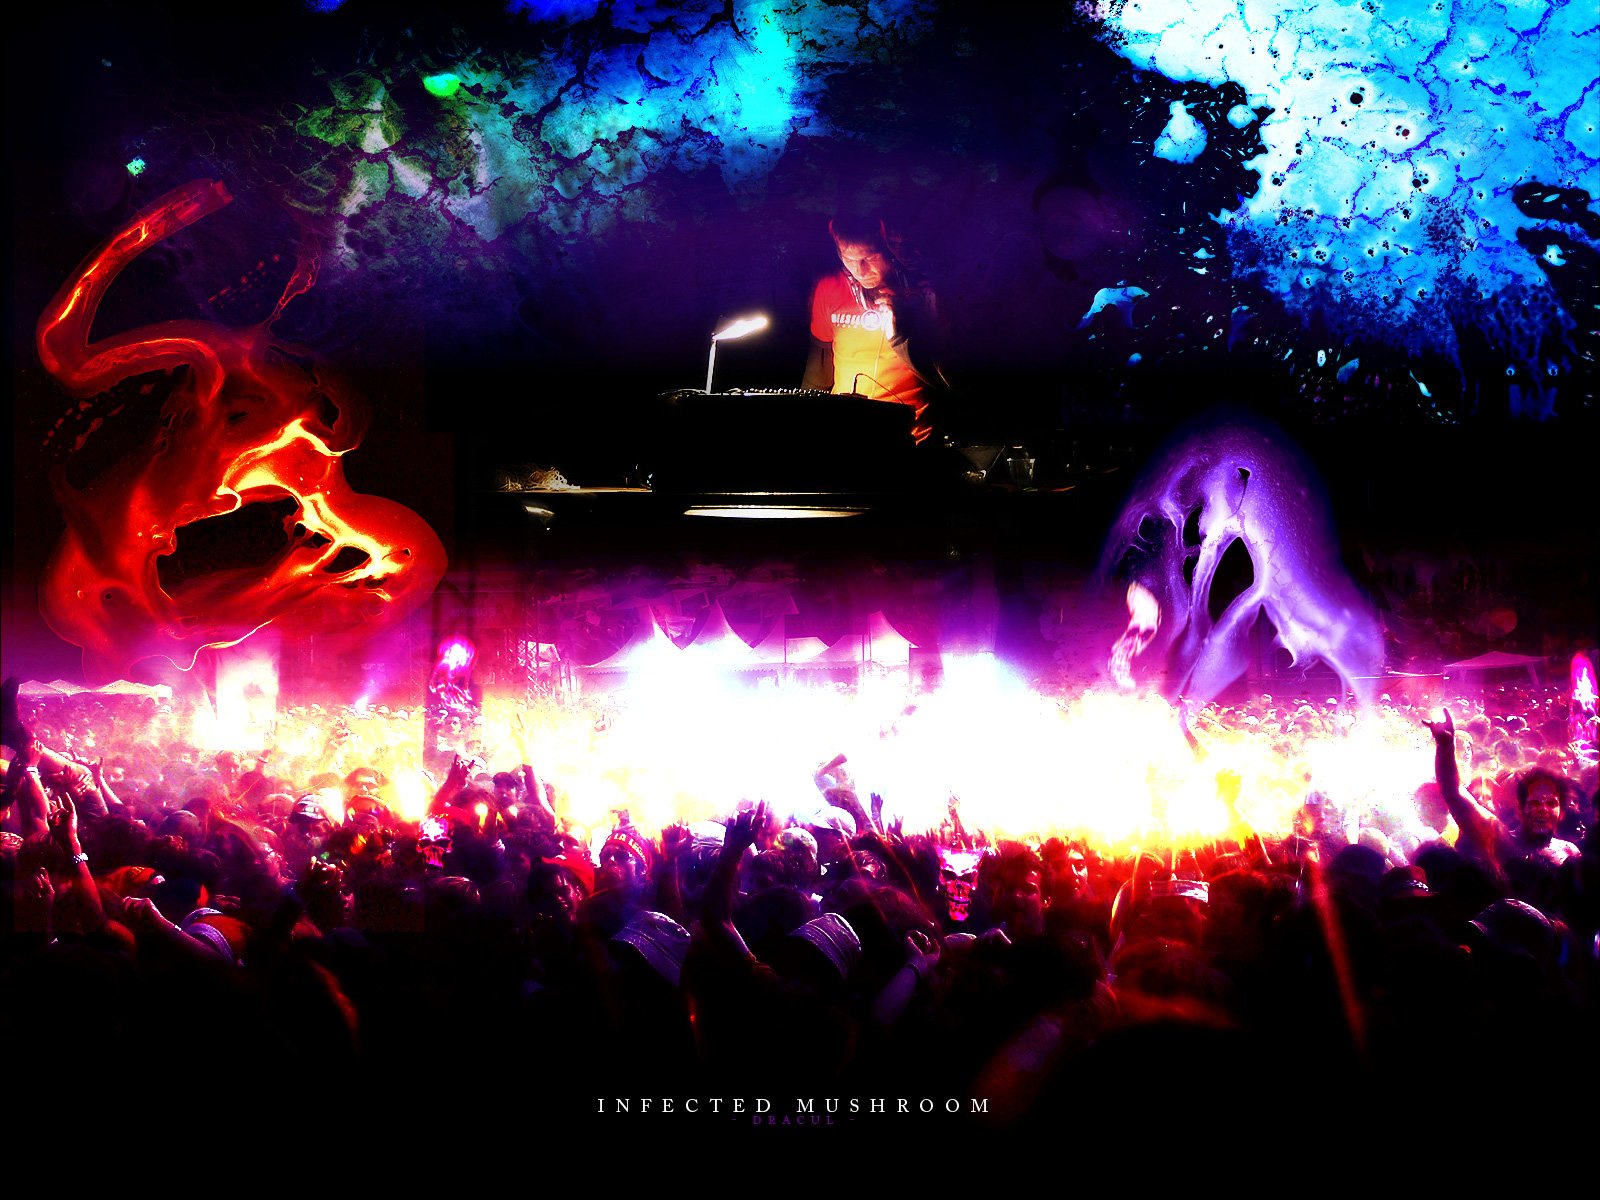 infected, Mushroom, Psychedelic, Trance, Electro, House, Electronica, Electronic, Rock, Industrial, Disc, Jockey, 1imush, Concert, Crowd Wallpaper